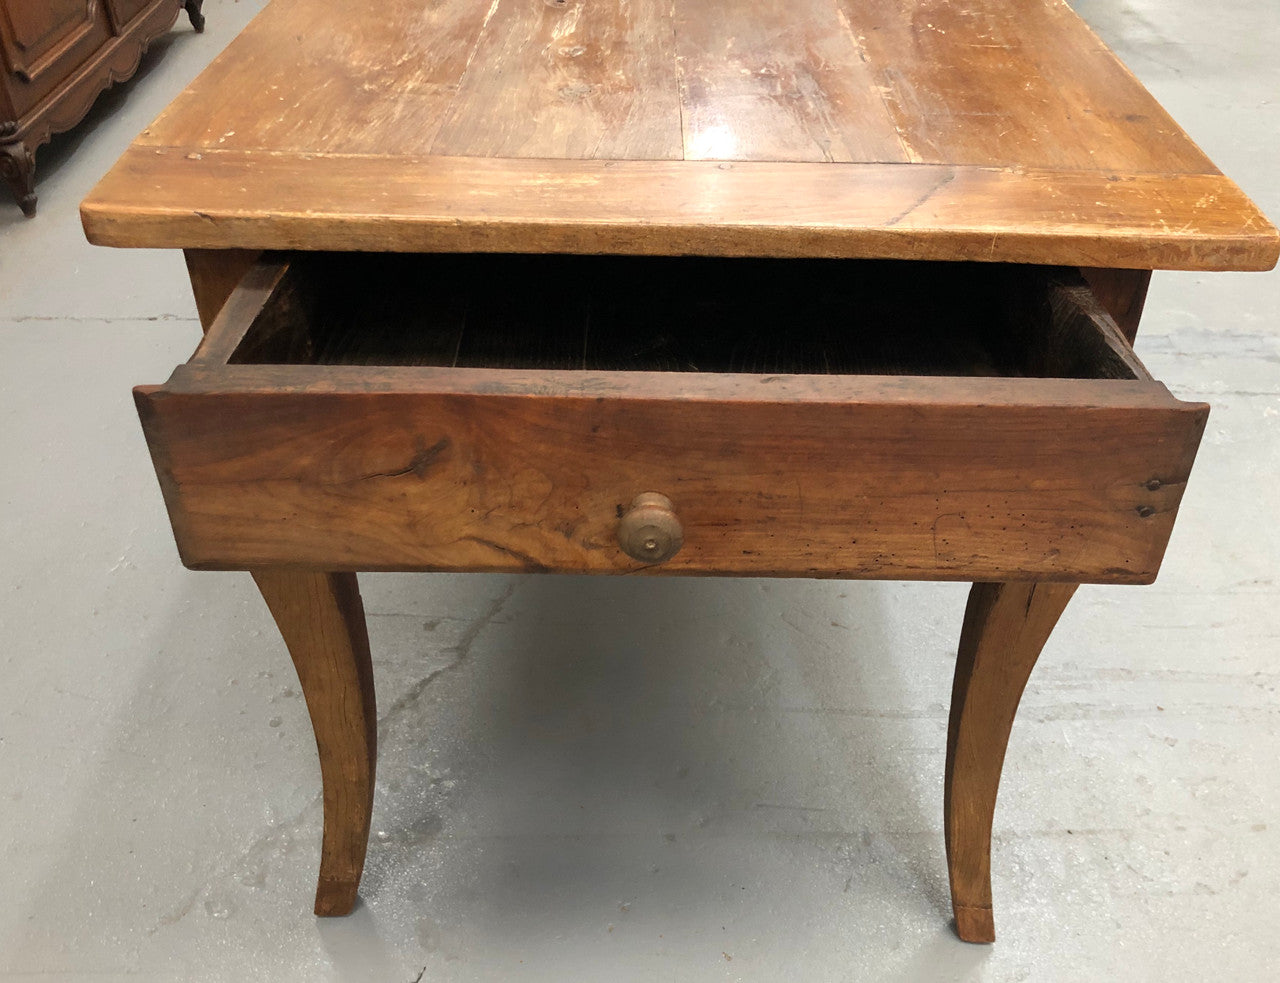 Early 19th Century French Farmhouse Table With Drawer & Pull Out Bread Board